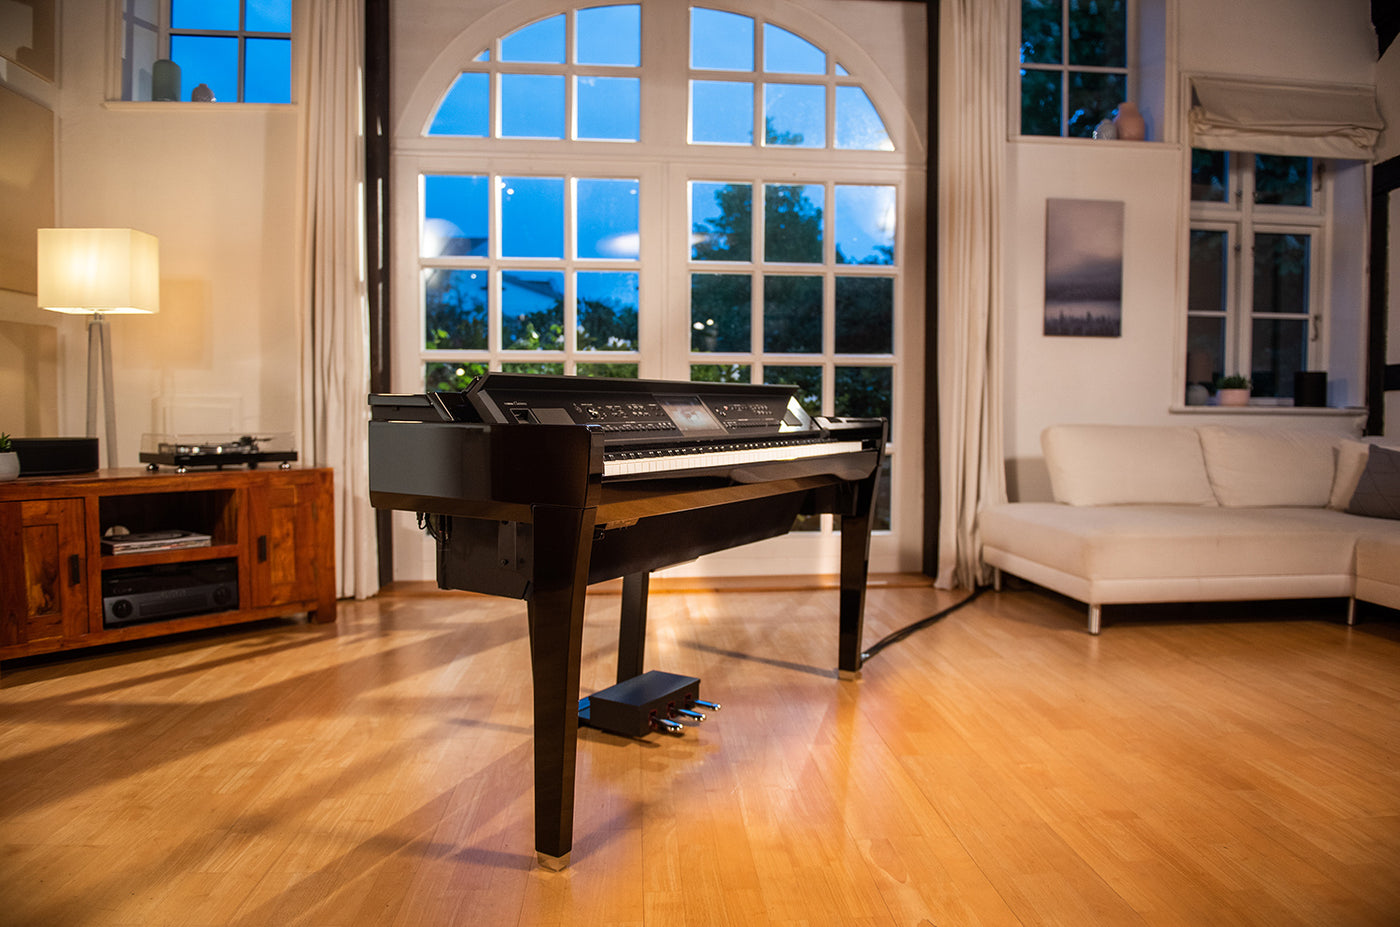 Elegant digital piano positioned in a well-lit living room with large windows and hardwood flooring, showcasing a modern interior design that integrates musical instruments as focal points of residential spaces within the piano industry.